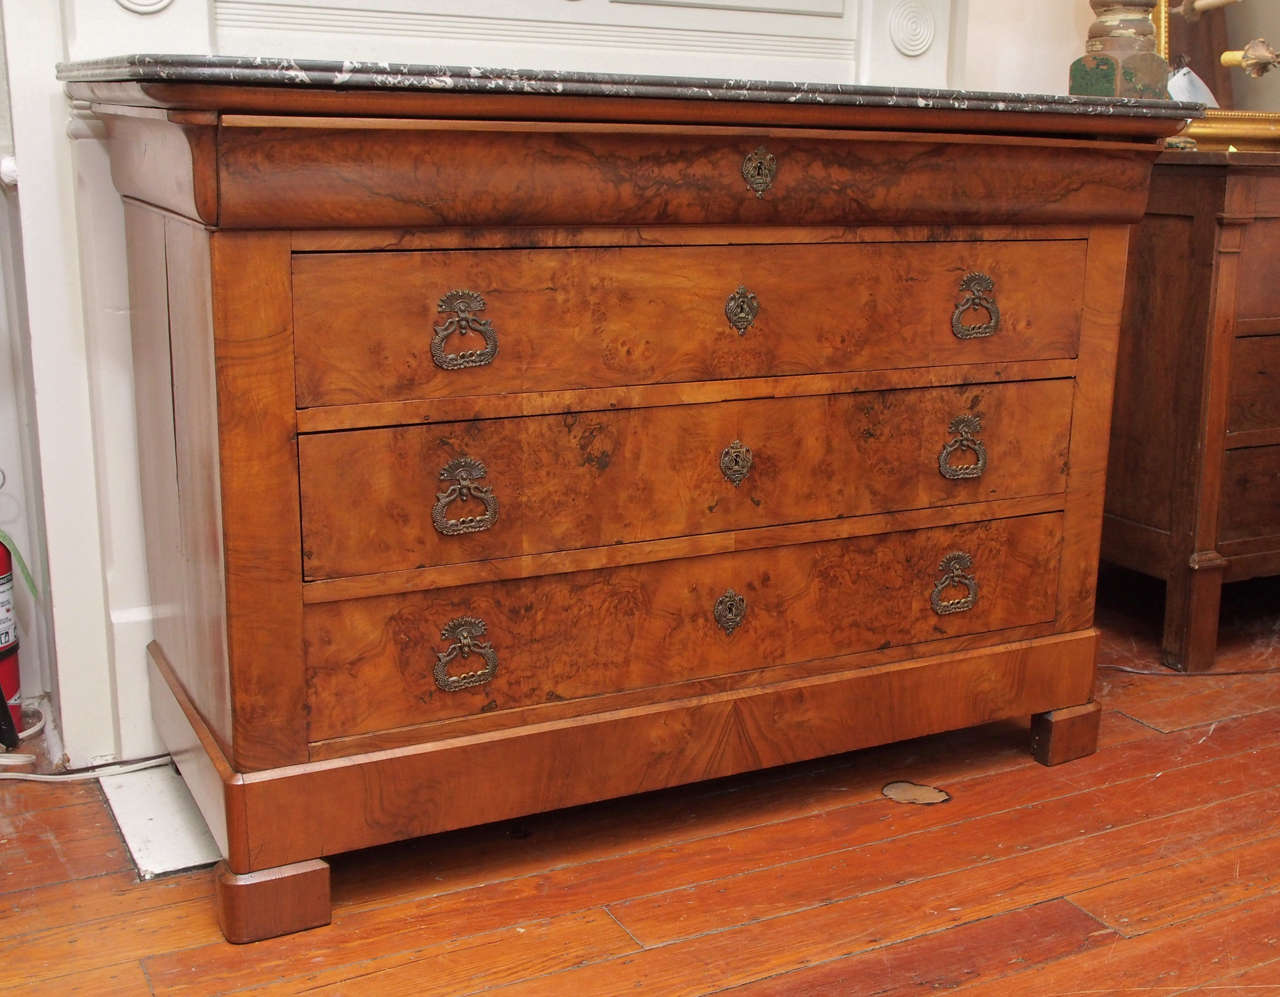 19th century Louis Philippe style  commode in burled walnut with 4 drawers . The top drawer locks  with a key. The marble top is grey and white.